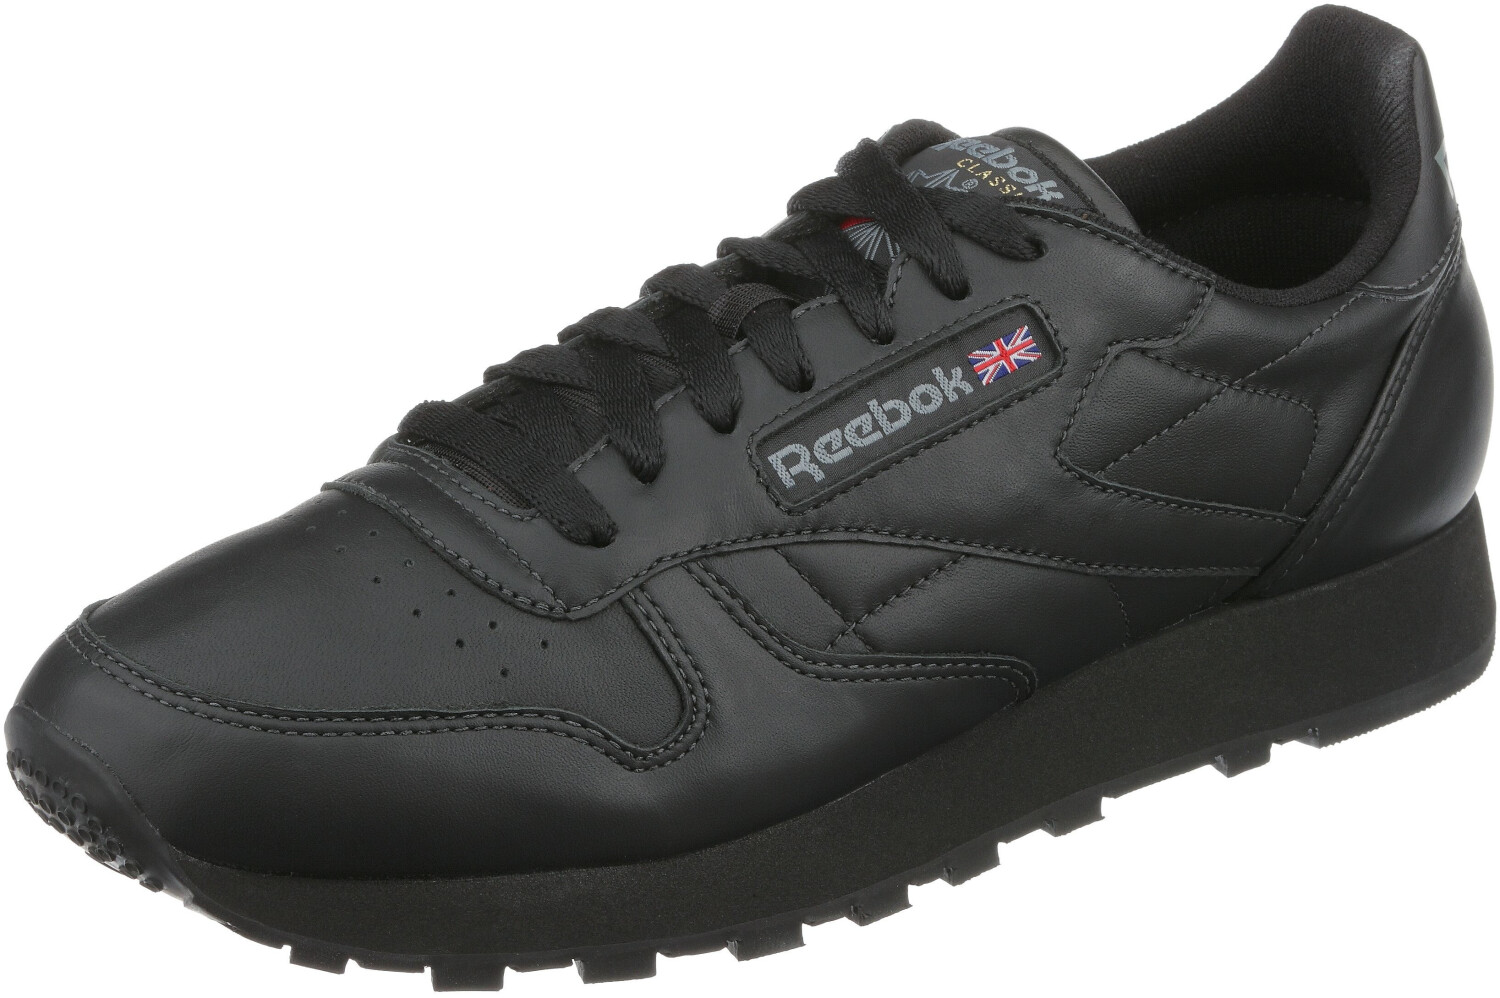 Buy Reebok Classic Leather all black from £29.99 (Today) – Best Black ...